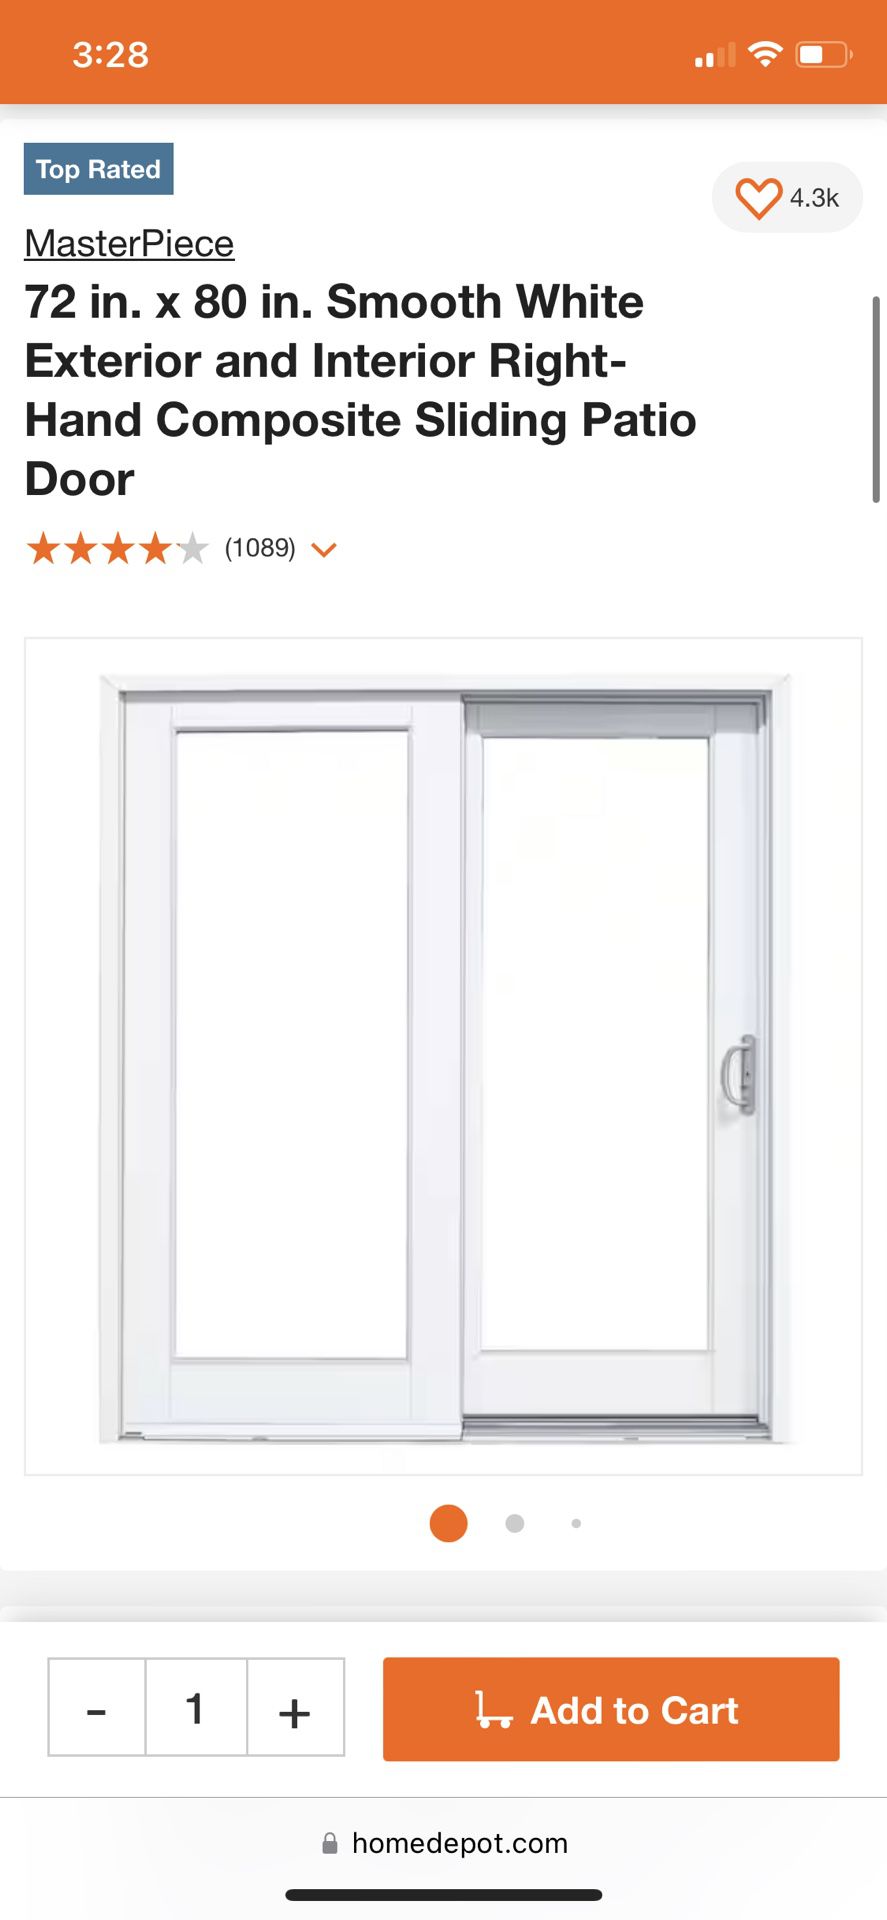 72 in. x 80 in. Smooth White Exterior and Interior Left-Hand Composite Sliding Patio Door